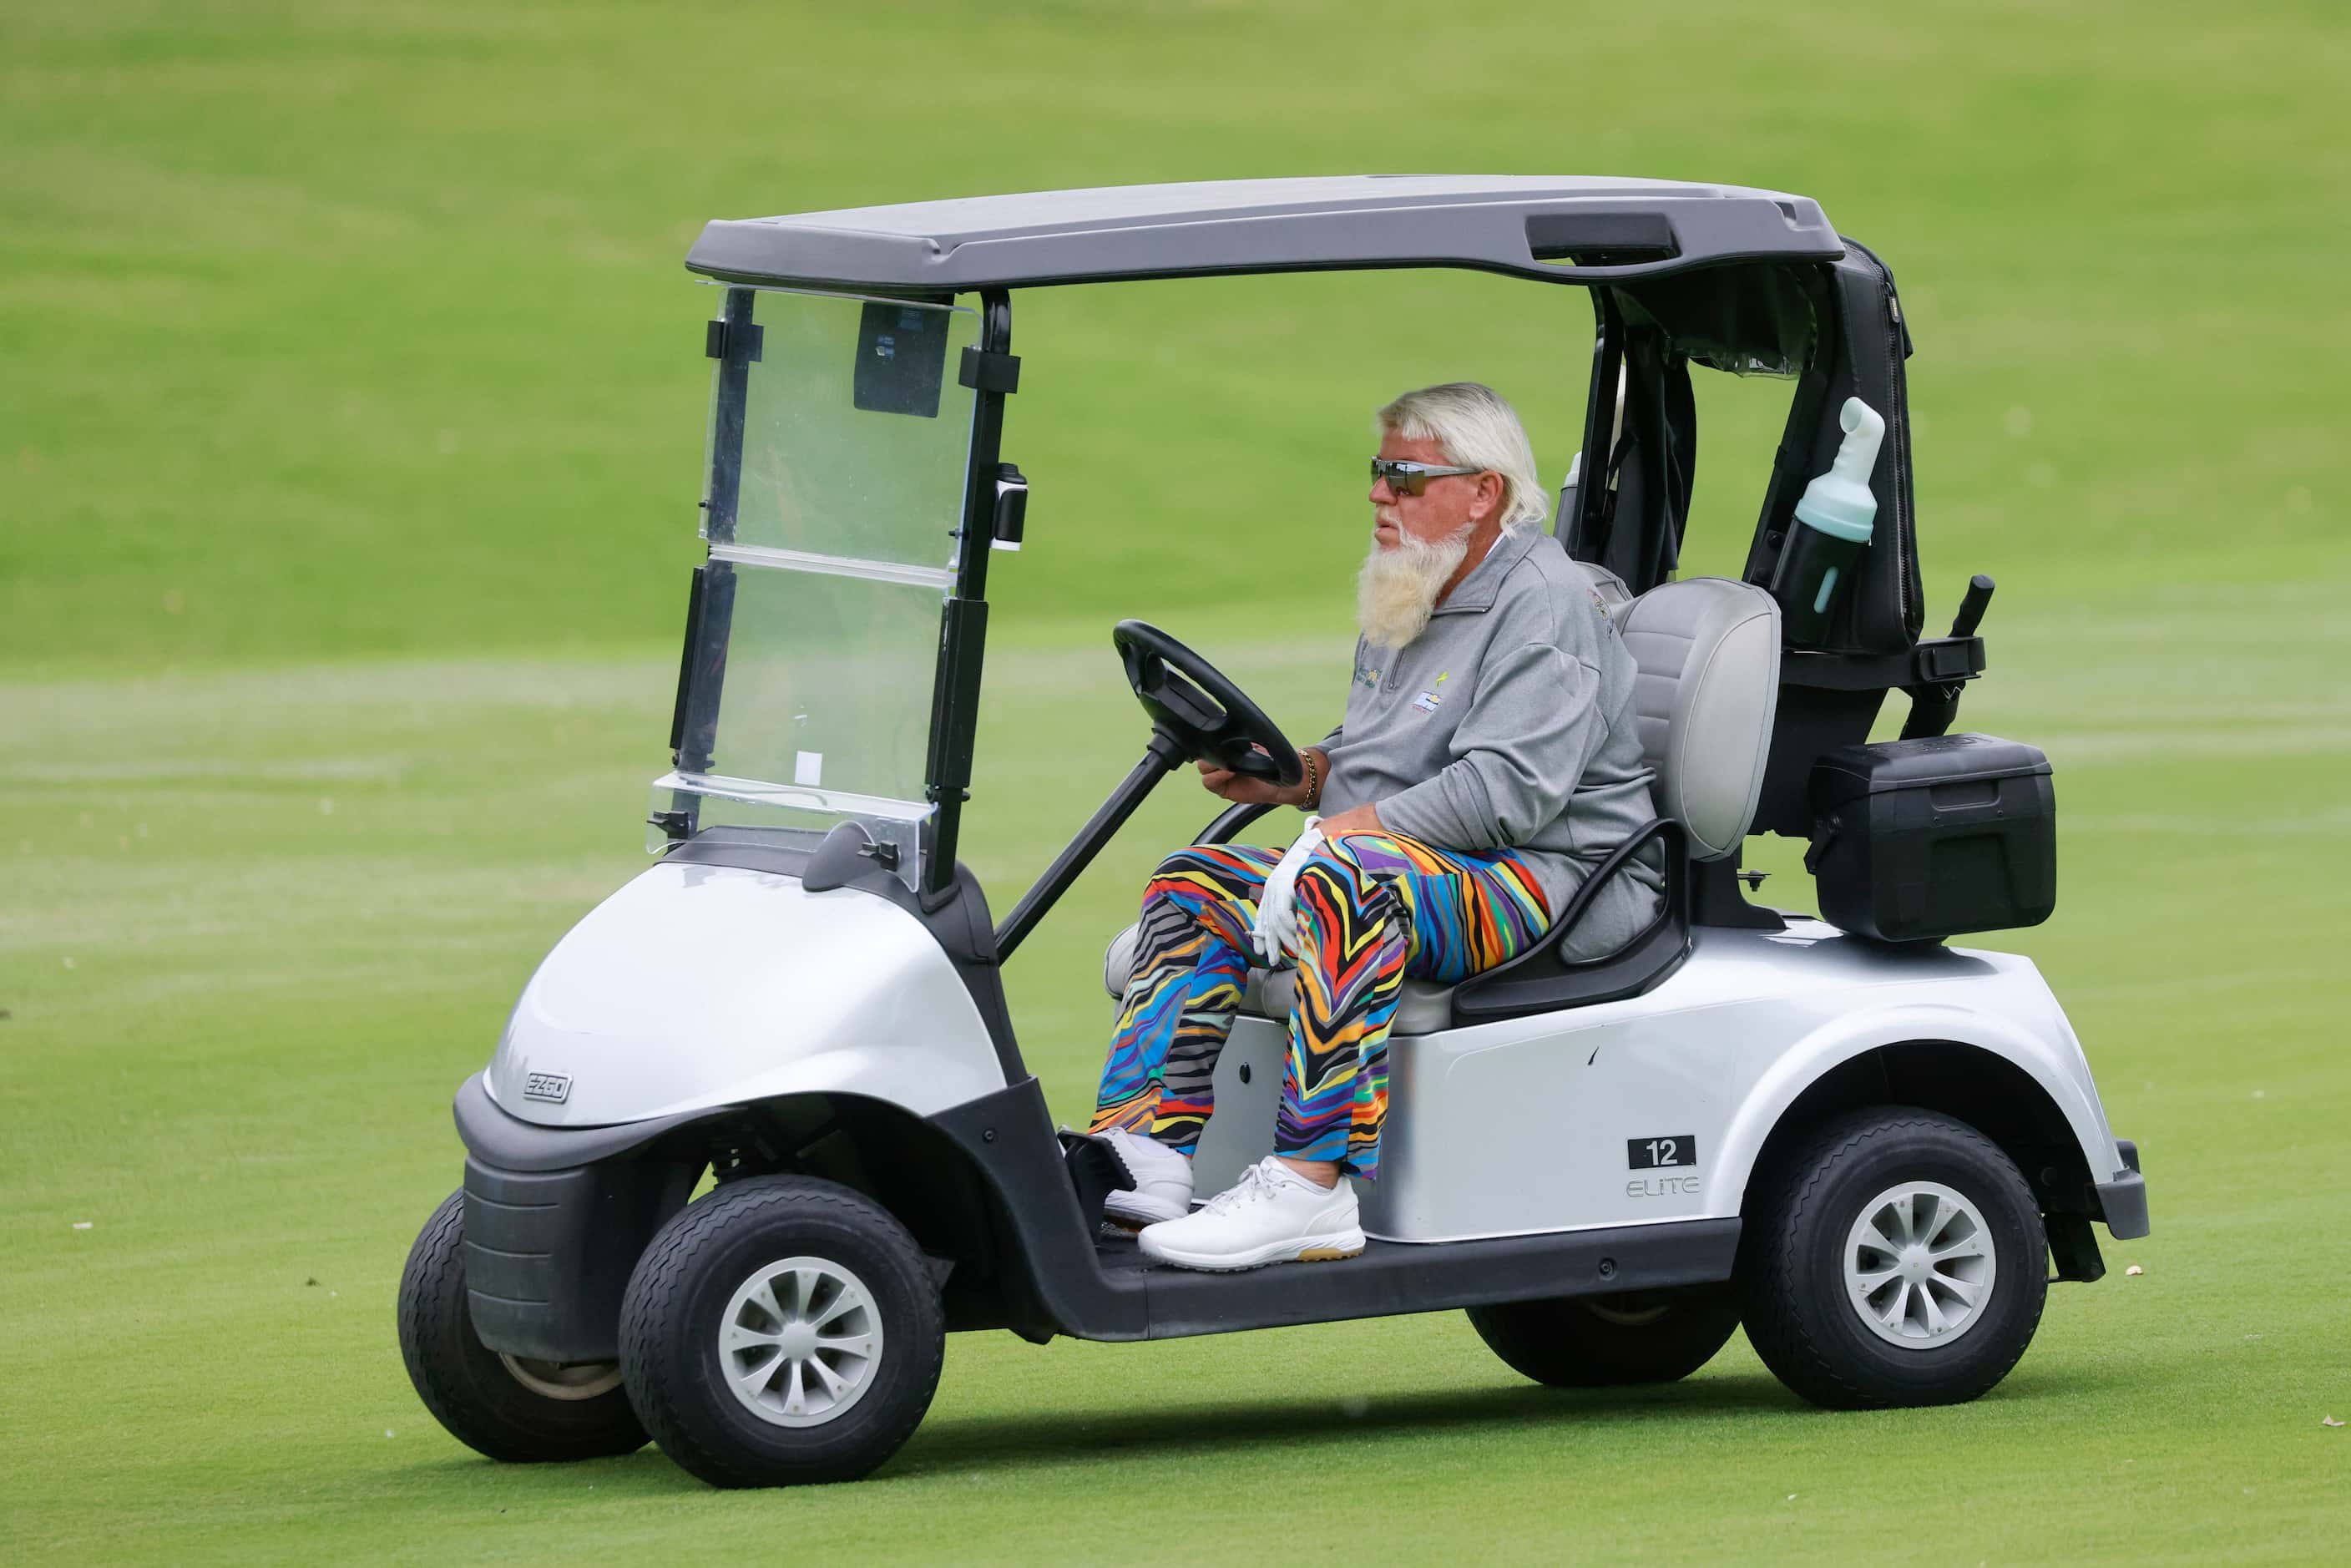 John Daly drives to his ball on the 18th fairway during the first round of the Invited...